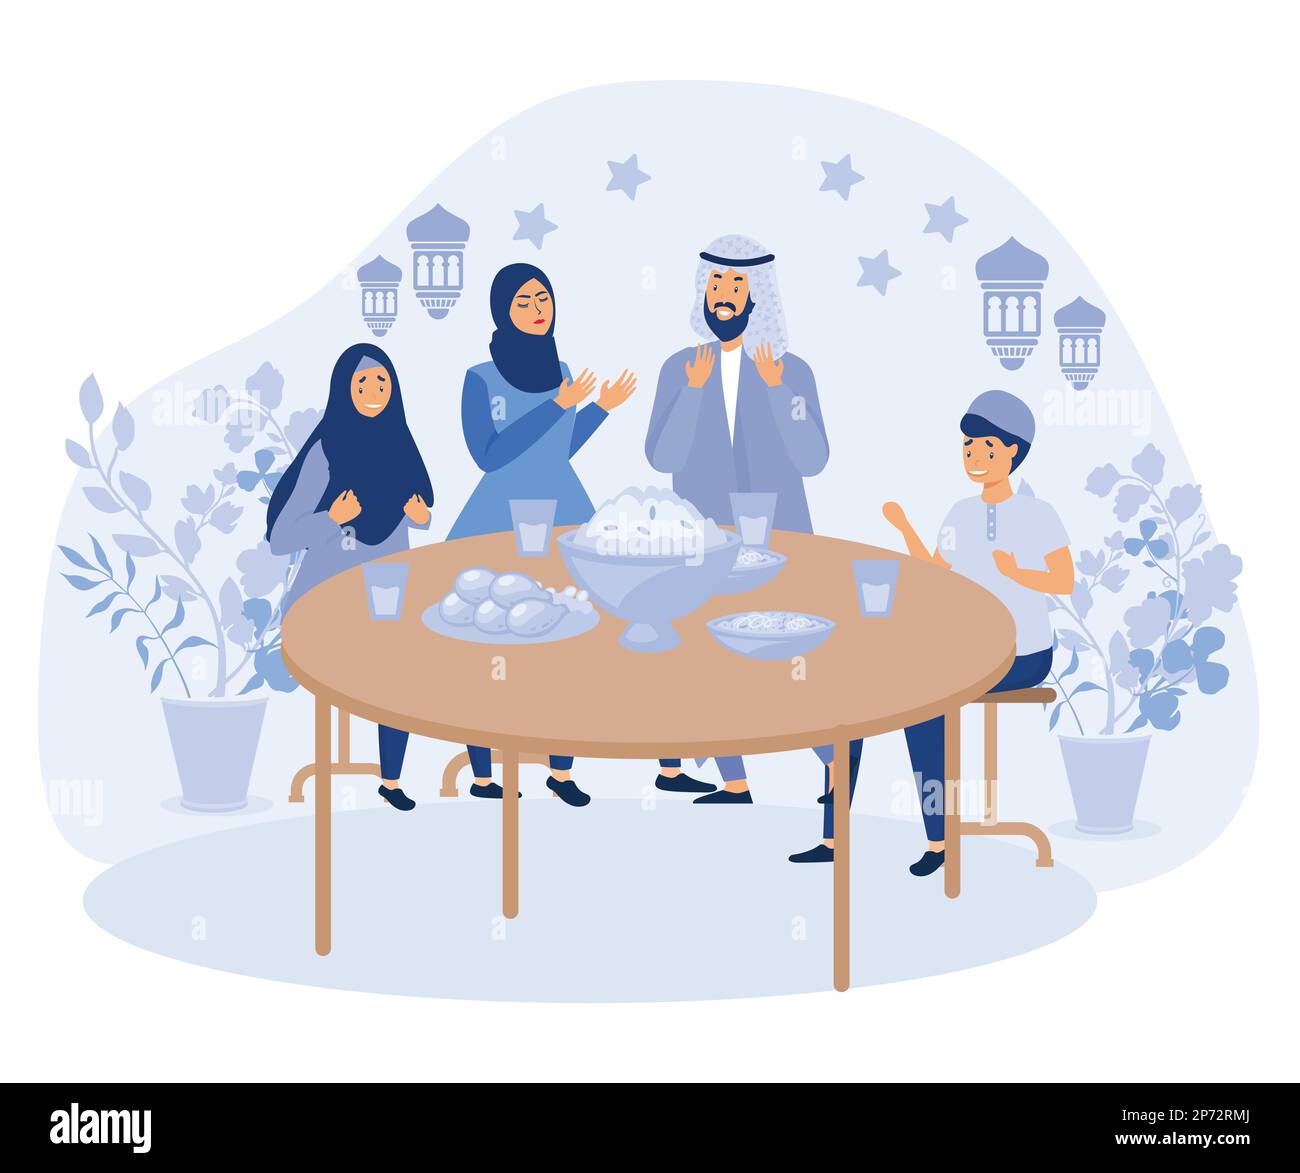 Ramadan dinner. Muslim family eating, iftar celebrating. Arab festive dishes on table, ritual greetings. After fasting, parents and kids together, fla Stock Vector